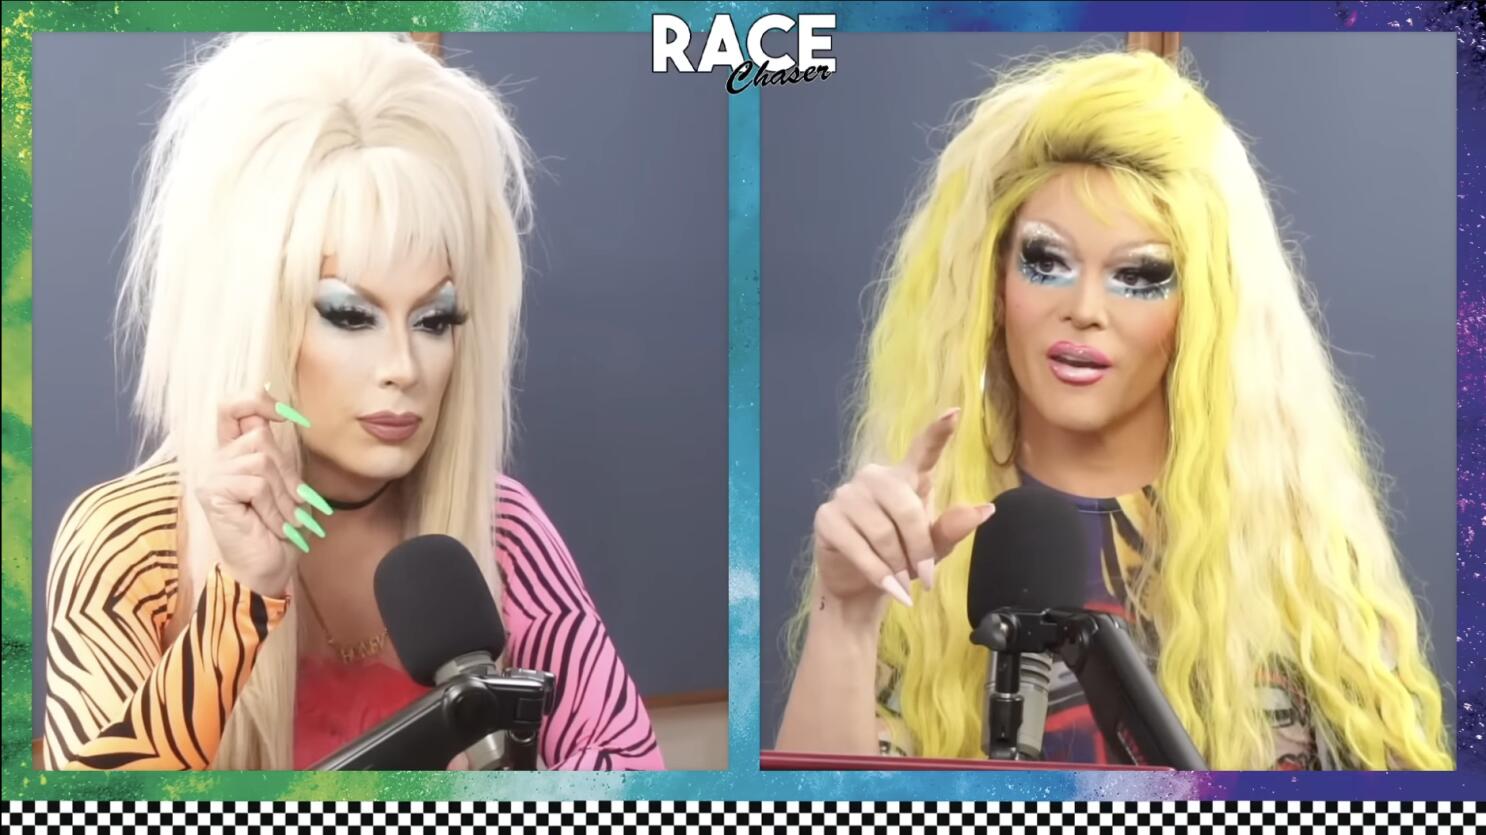 Let's Talk About Wigs And Race